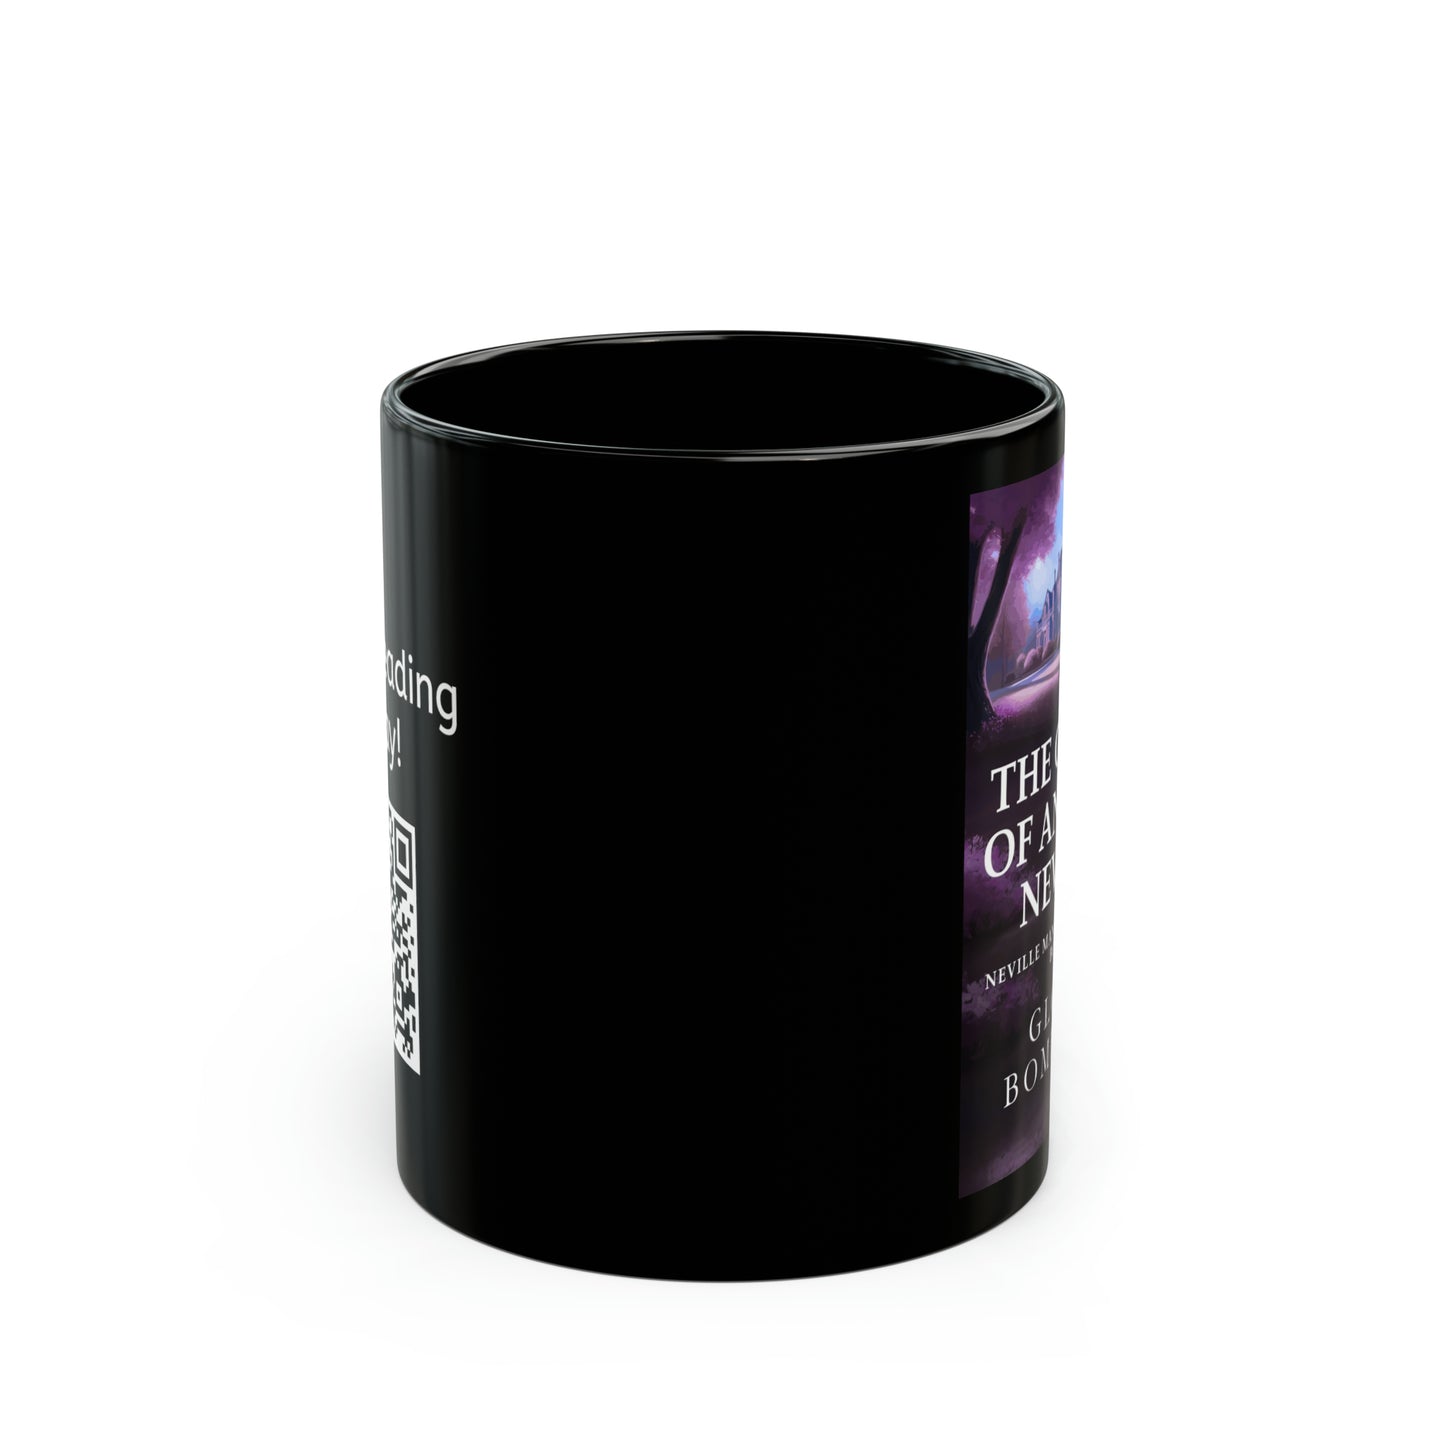 The Ghost of Andrew Neville - Black Coffee Mug